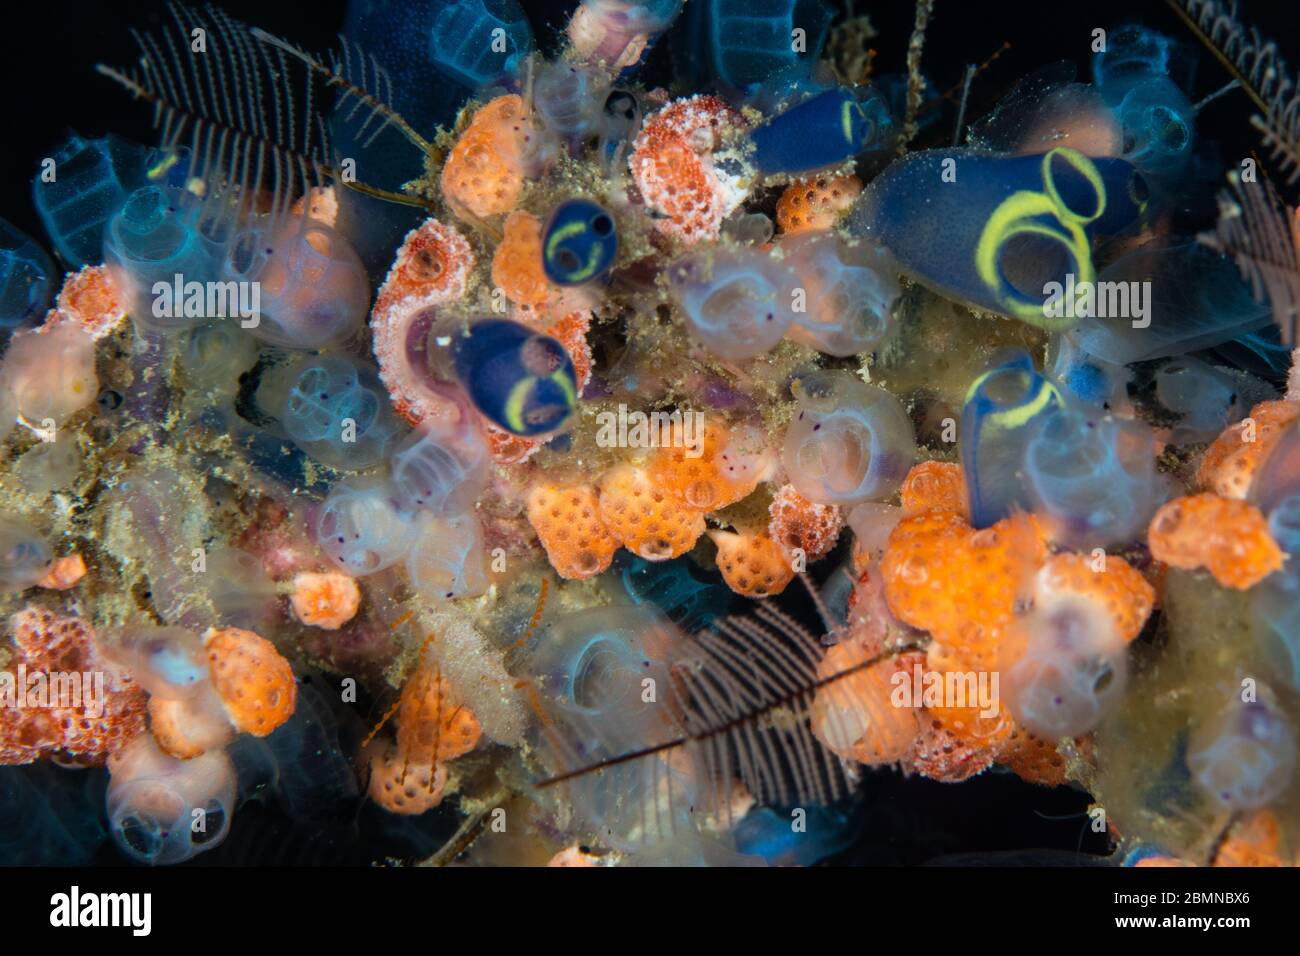 A variety of colorful tunicates, hydroids, sponges, and other marine invertebrates compete for space to grow on a coral reef in Raja Ampat, Indonesia. Stock Photo